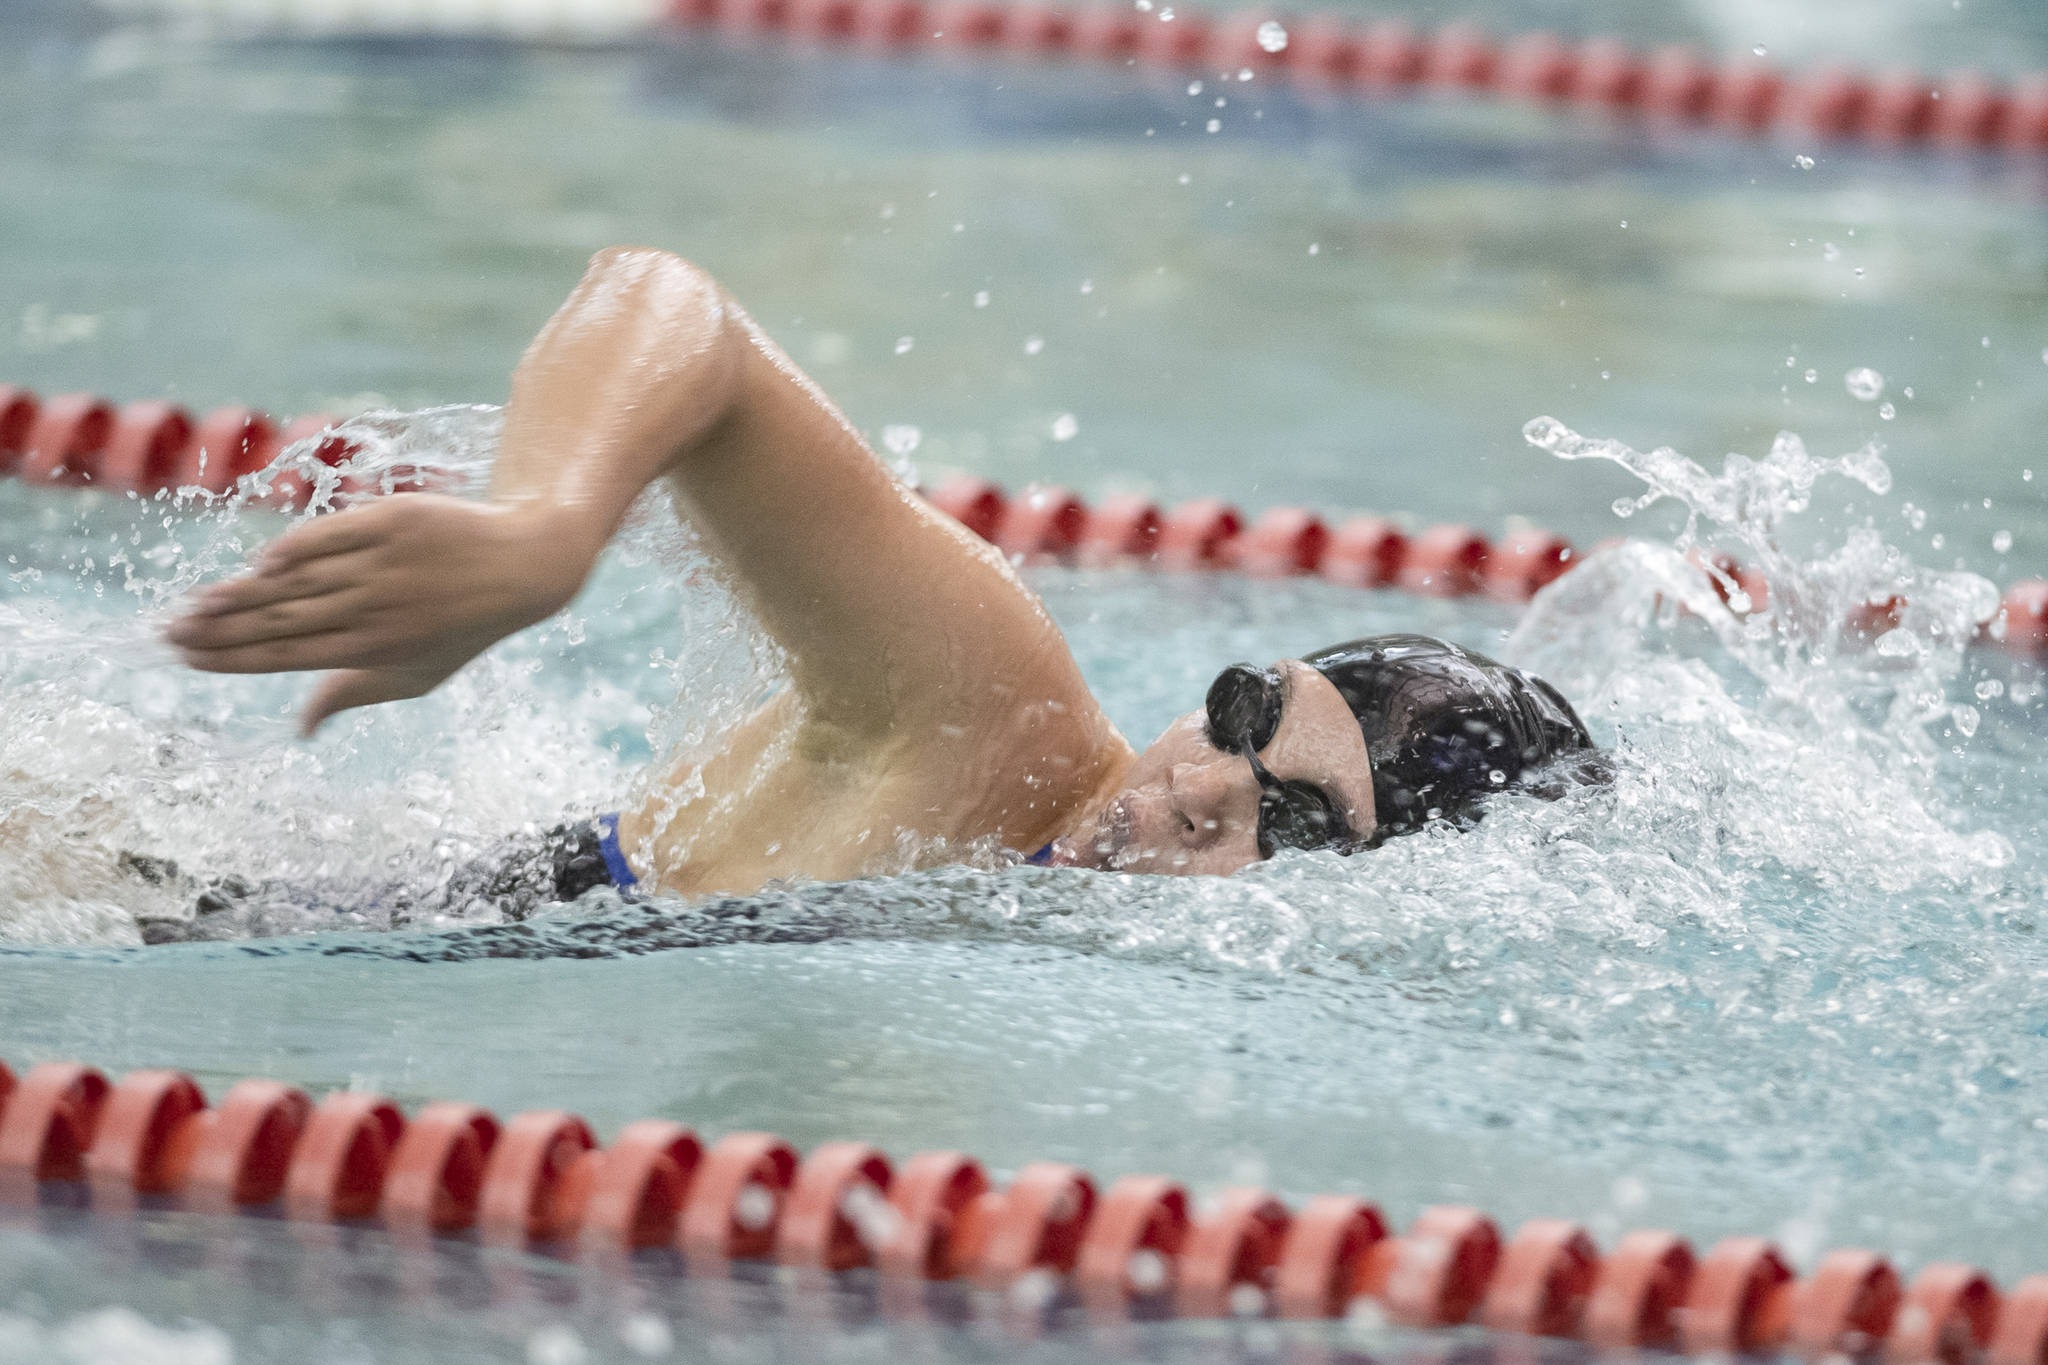 It went swimmingly: Thunder Mountain sophomore helps set two new school records